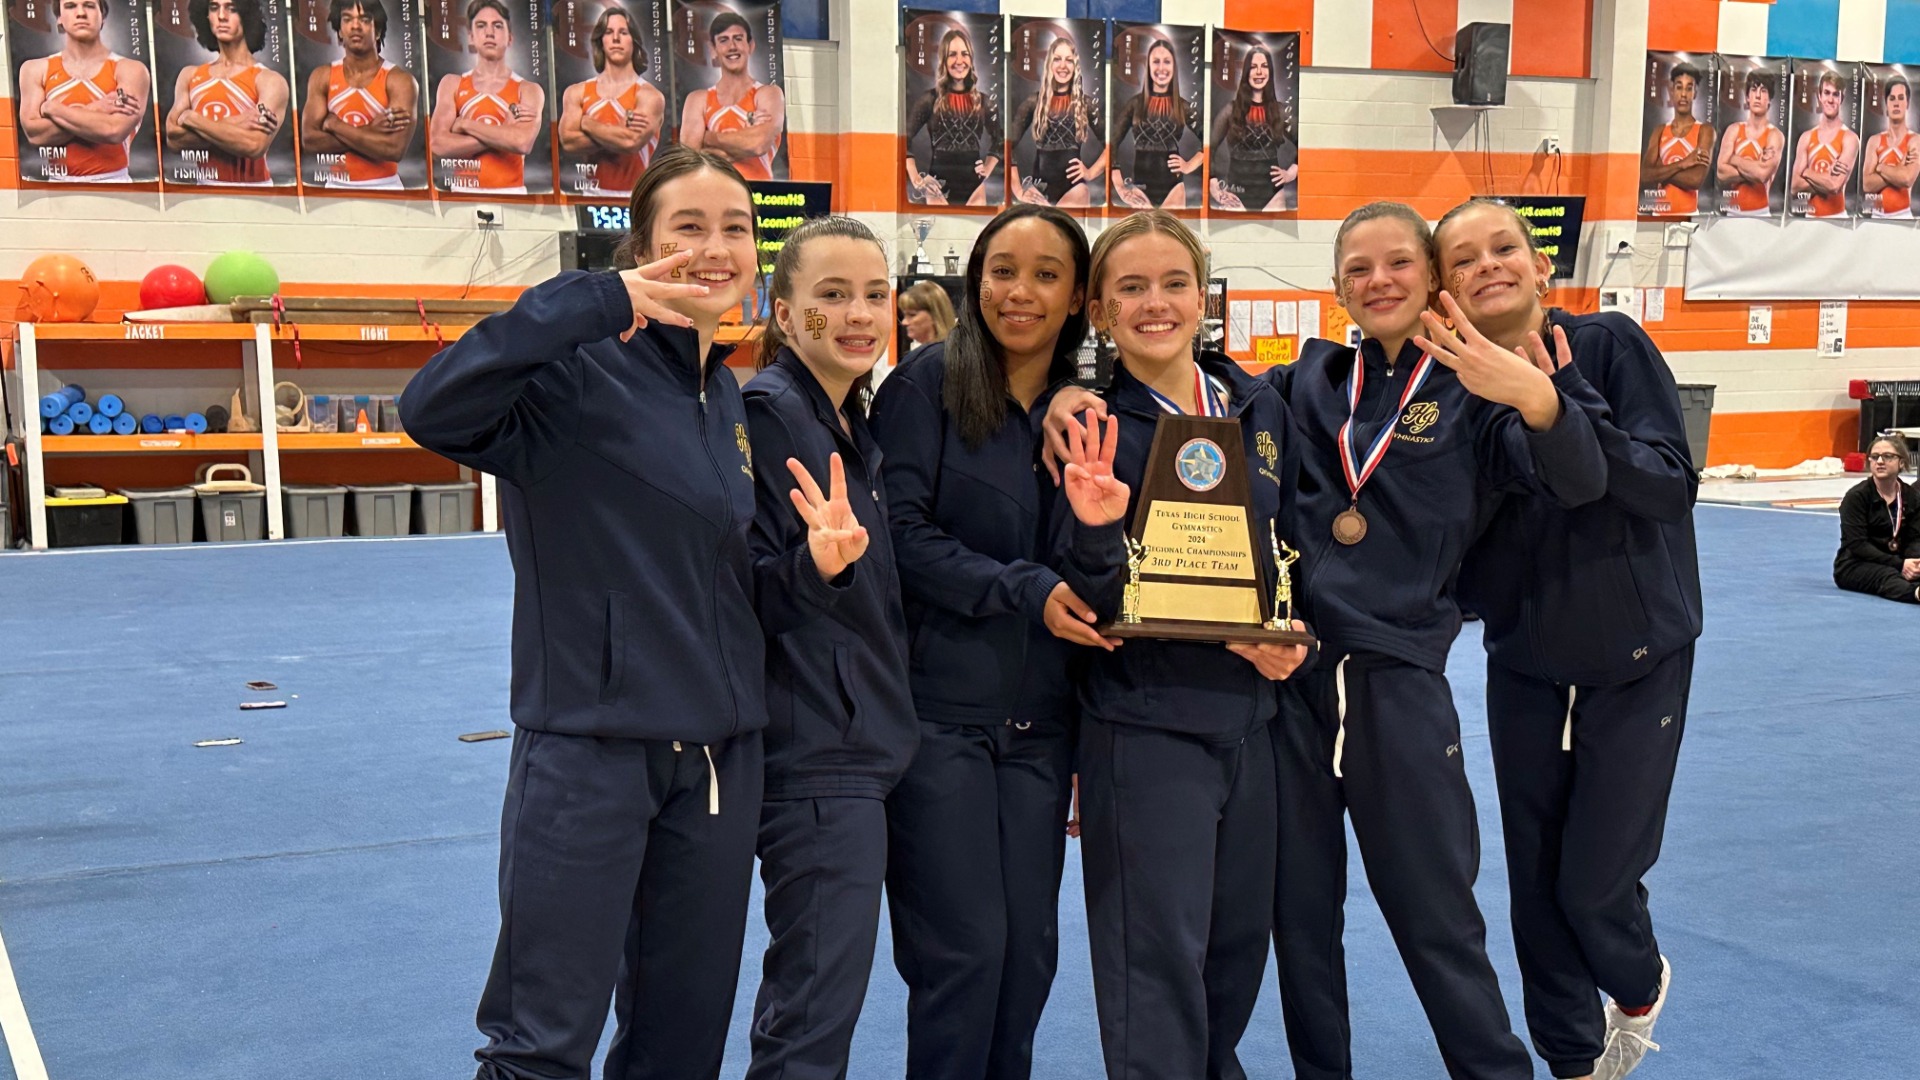 Slide 4 - Lady Scots Gymnastics Team Places 3rd at Regional Championships